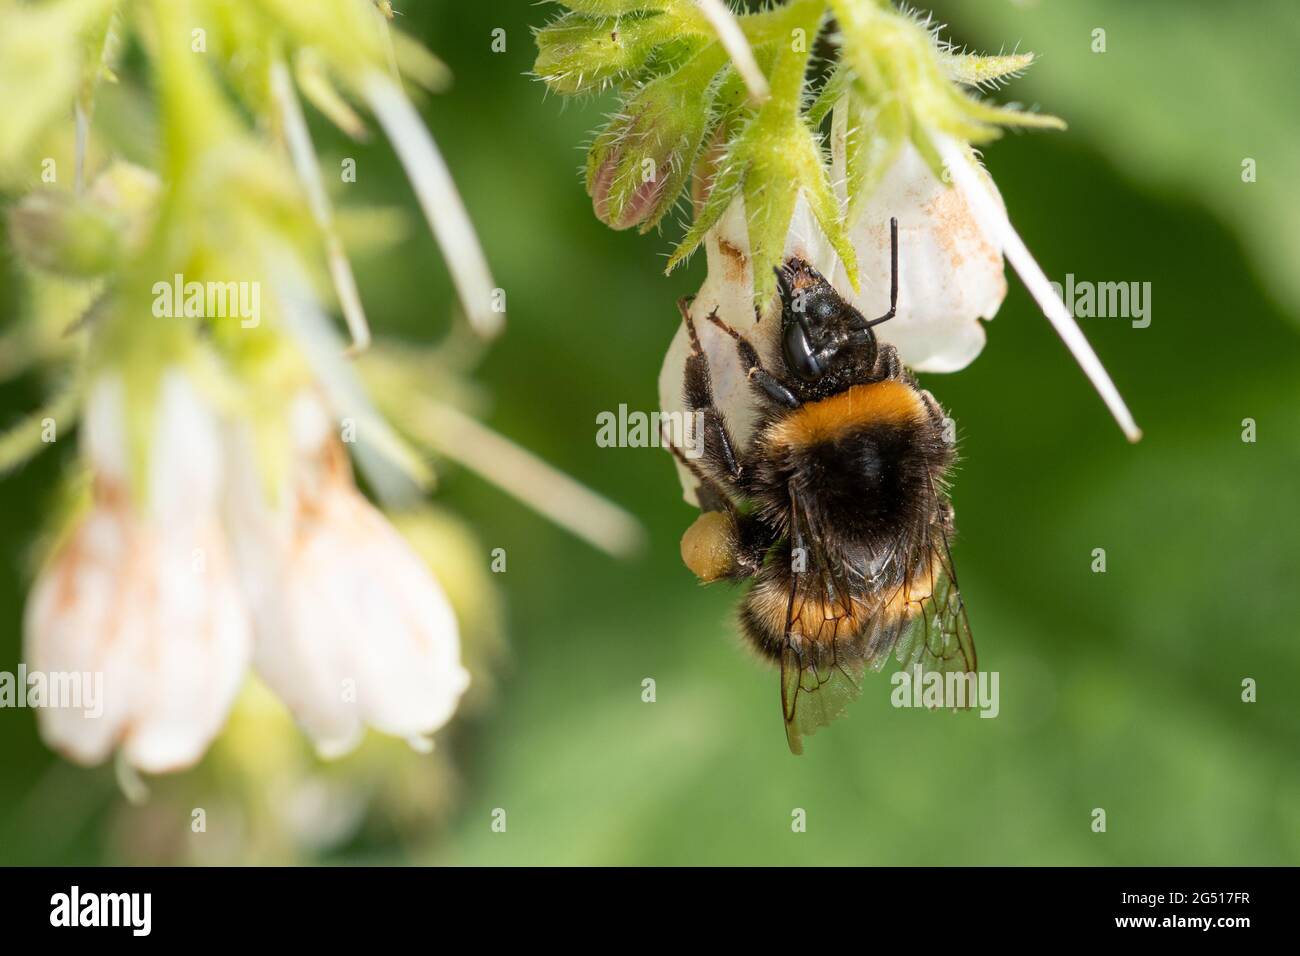 Bumblebee nectar robbing from common comfrey flowers (Symphytum officinale), UK. Stock Photo